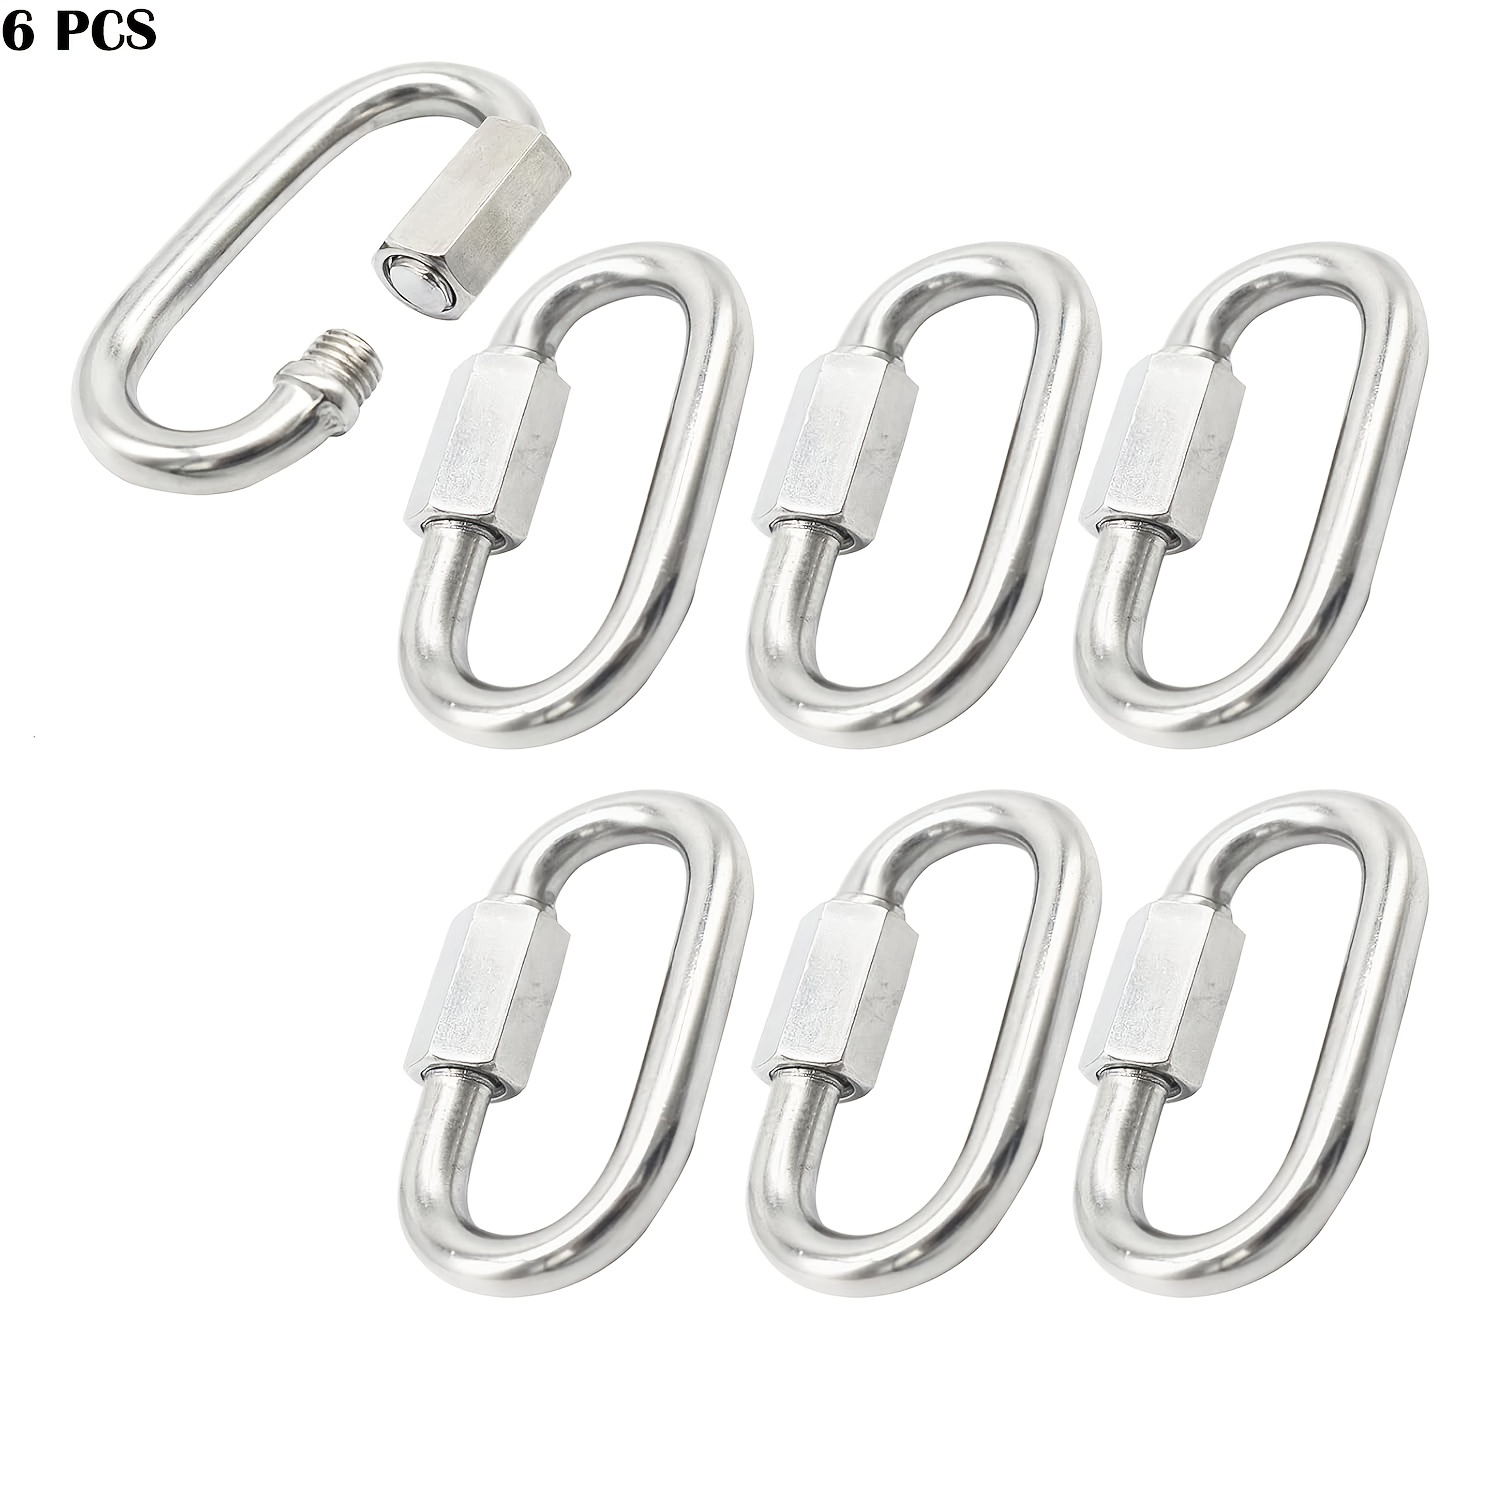 6 Pcs Carabiner Clip Spring Snap Hook - 304 Stainless Steel Quick